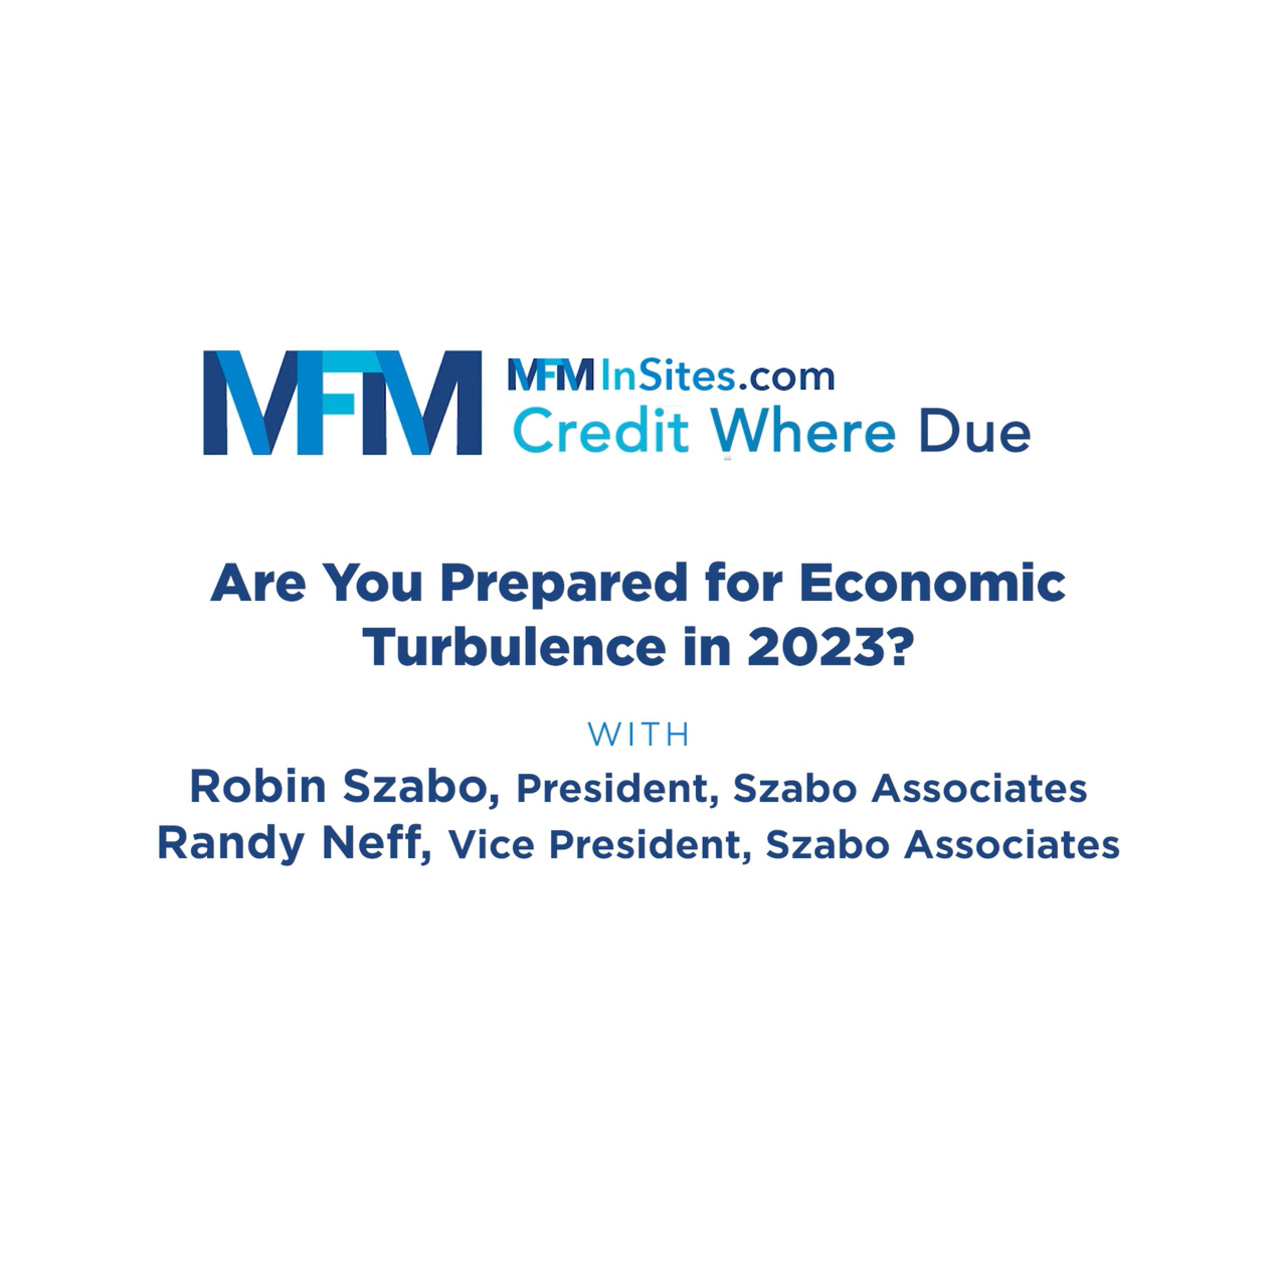 Cover image for  article: MFM's "Credit Where Due" -- Are You Prepared for Economic Turbulence in 2023? (Video)